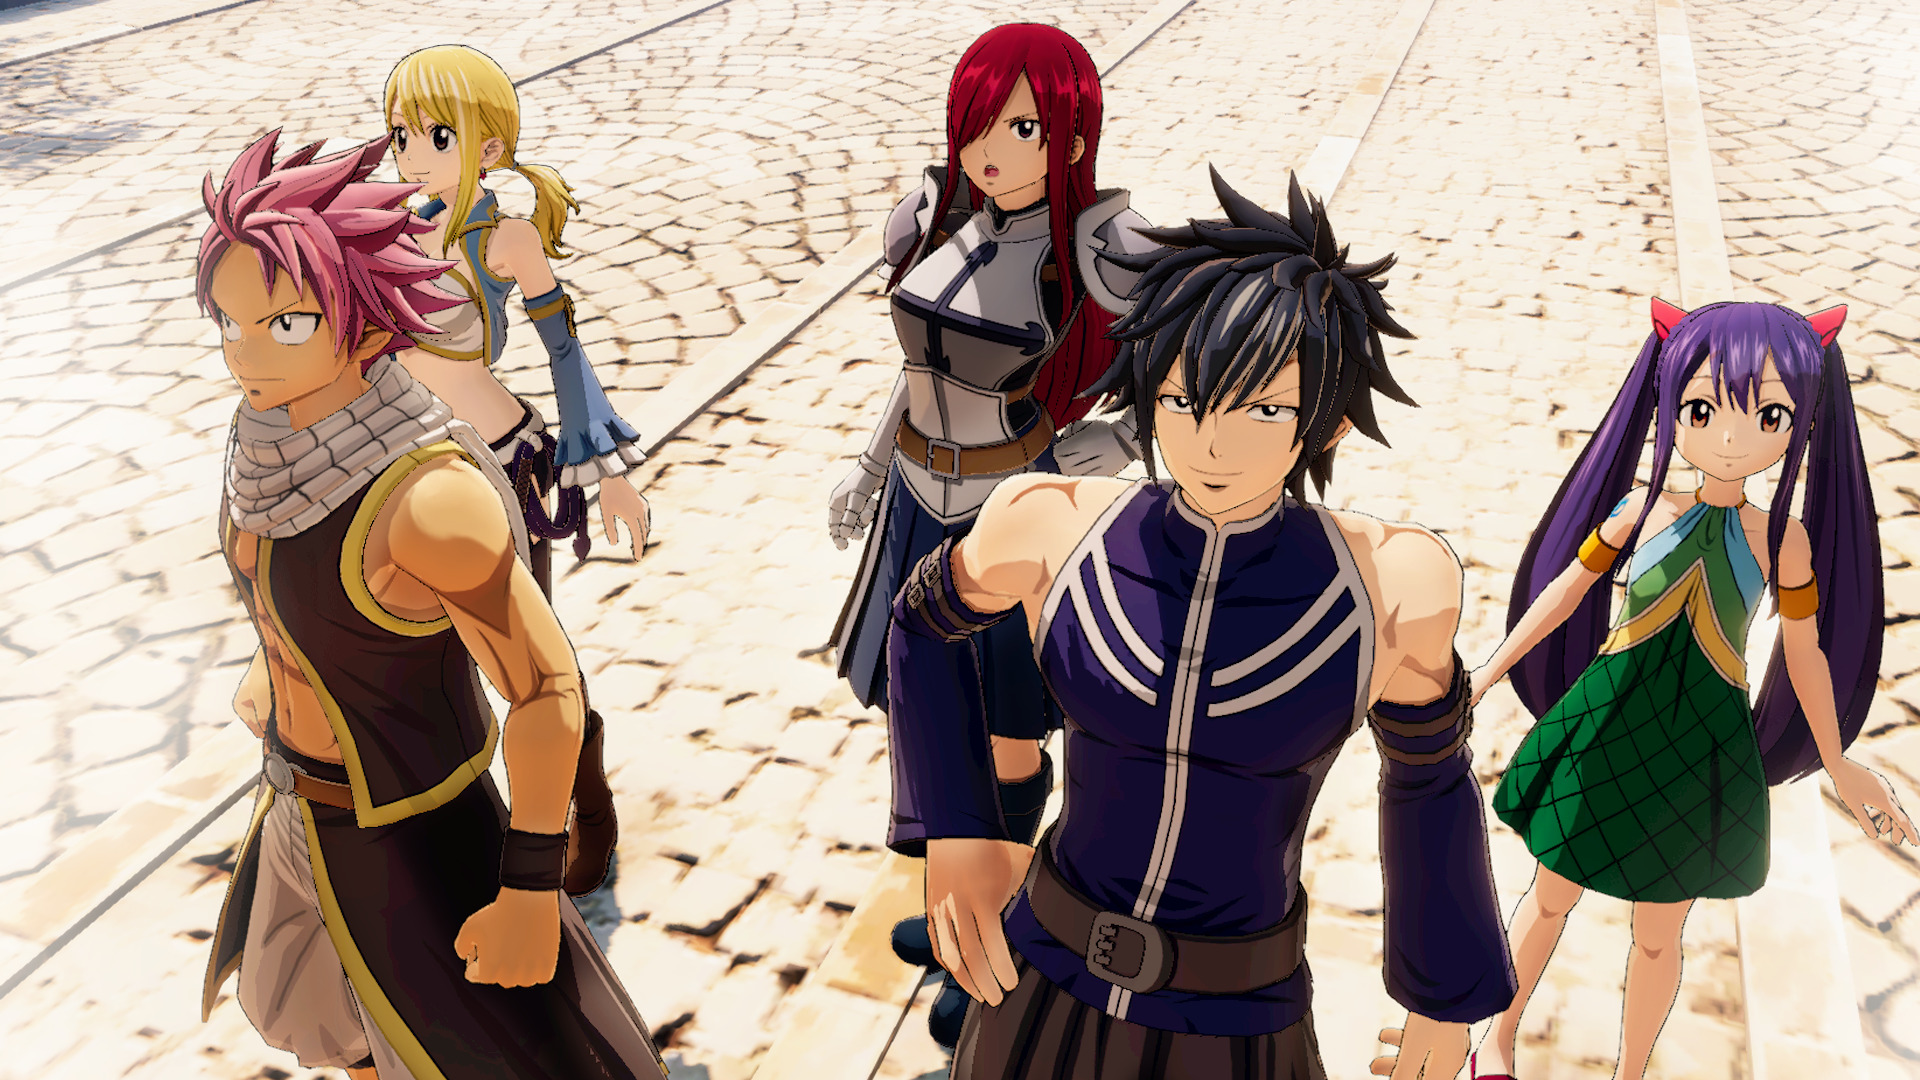 Review The Fairy Tail Game Is Fun But Is Definitely For The Fans